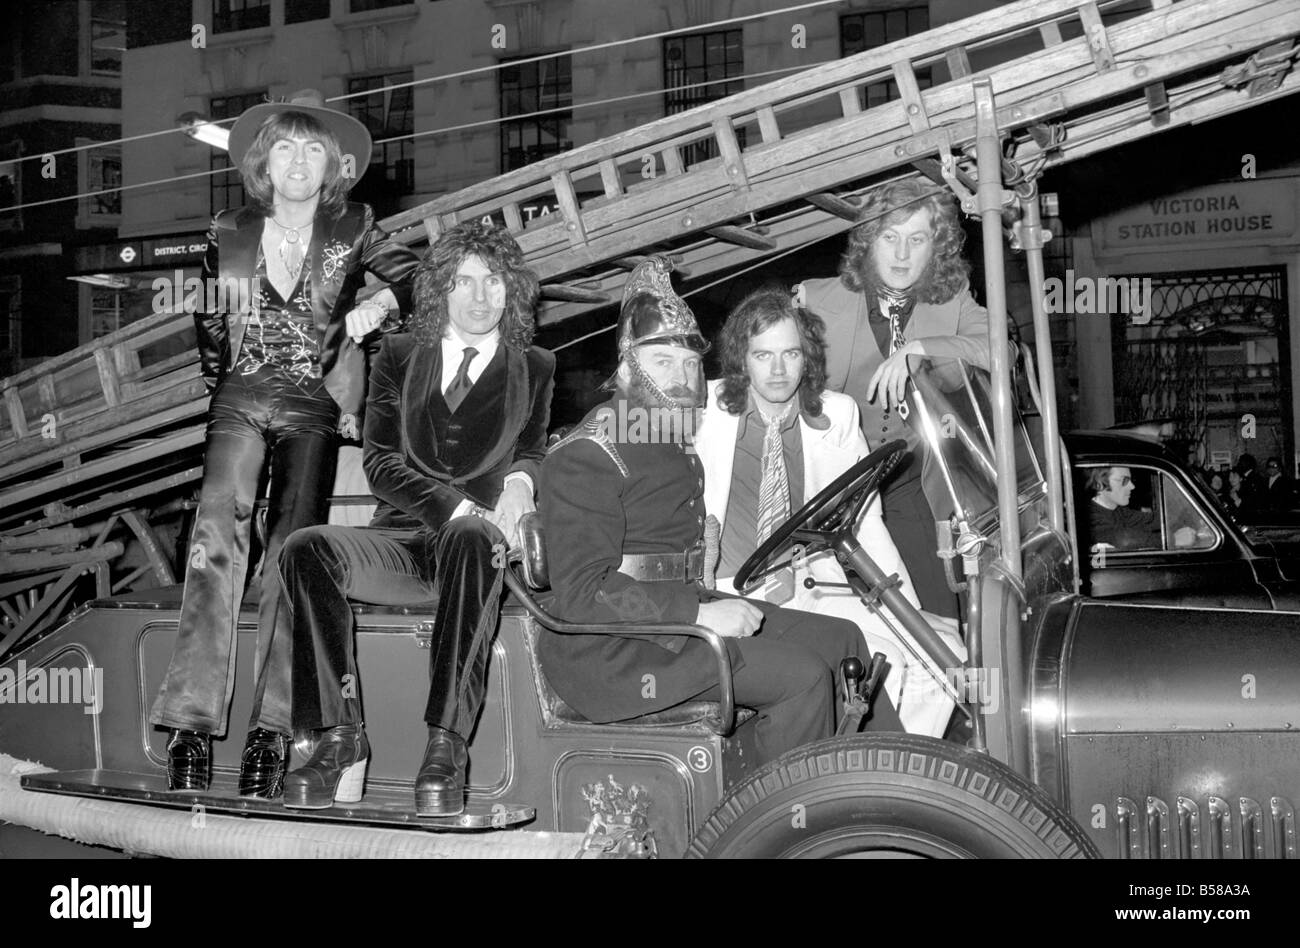 The Slade pop group on fire engine. L to R Dave Hill, Don Powell, Jimmy Lea, Noddy Holder. February 1975 75-00872-001 Stock Photo